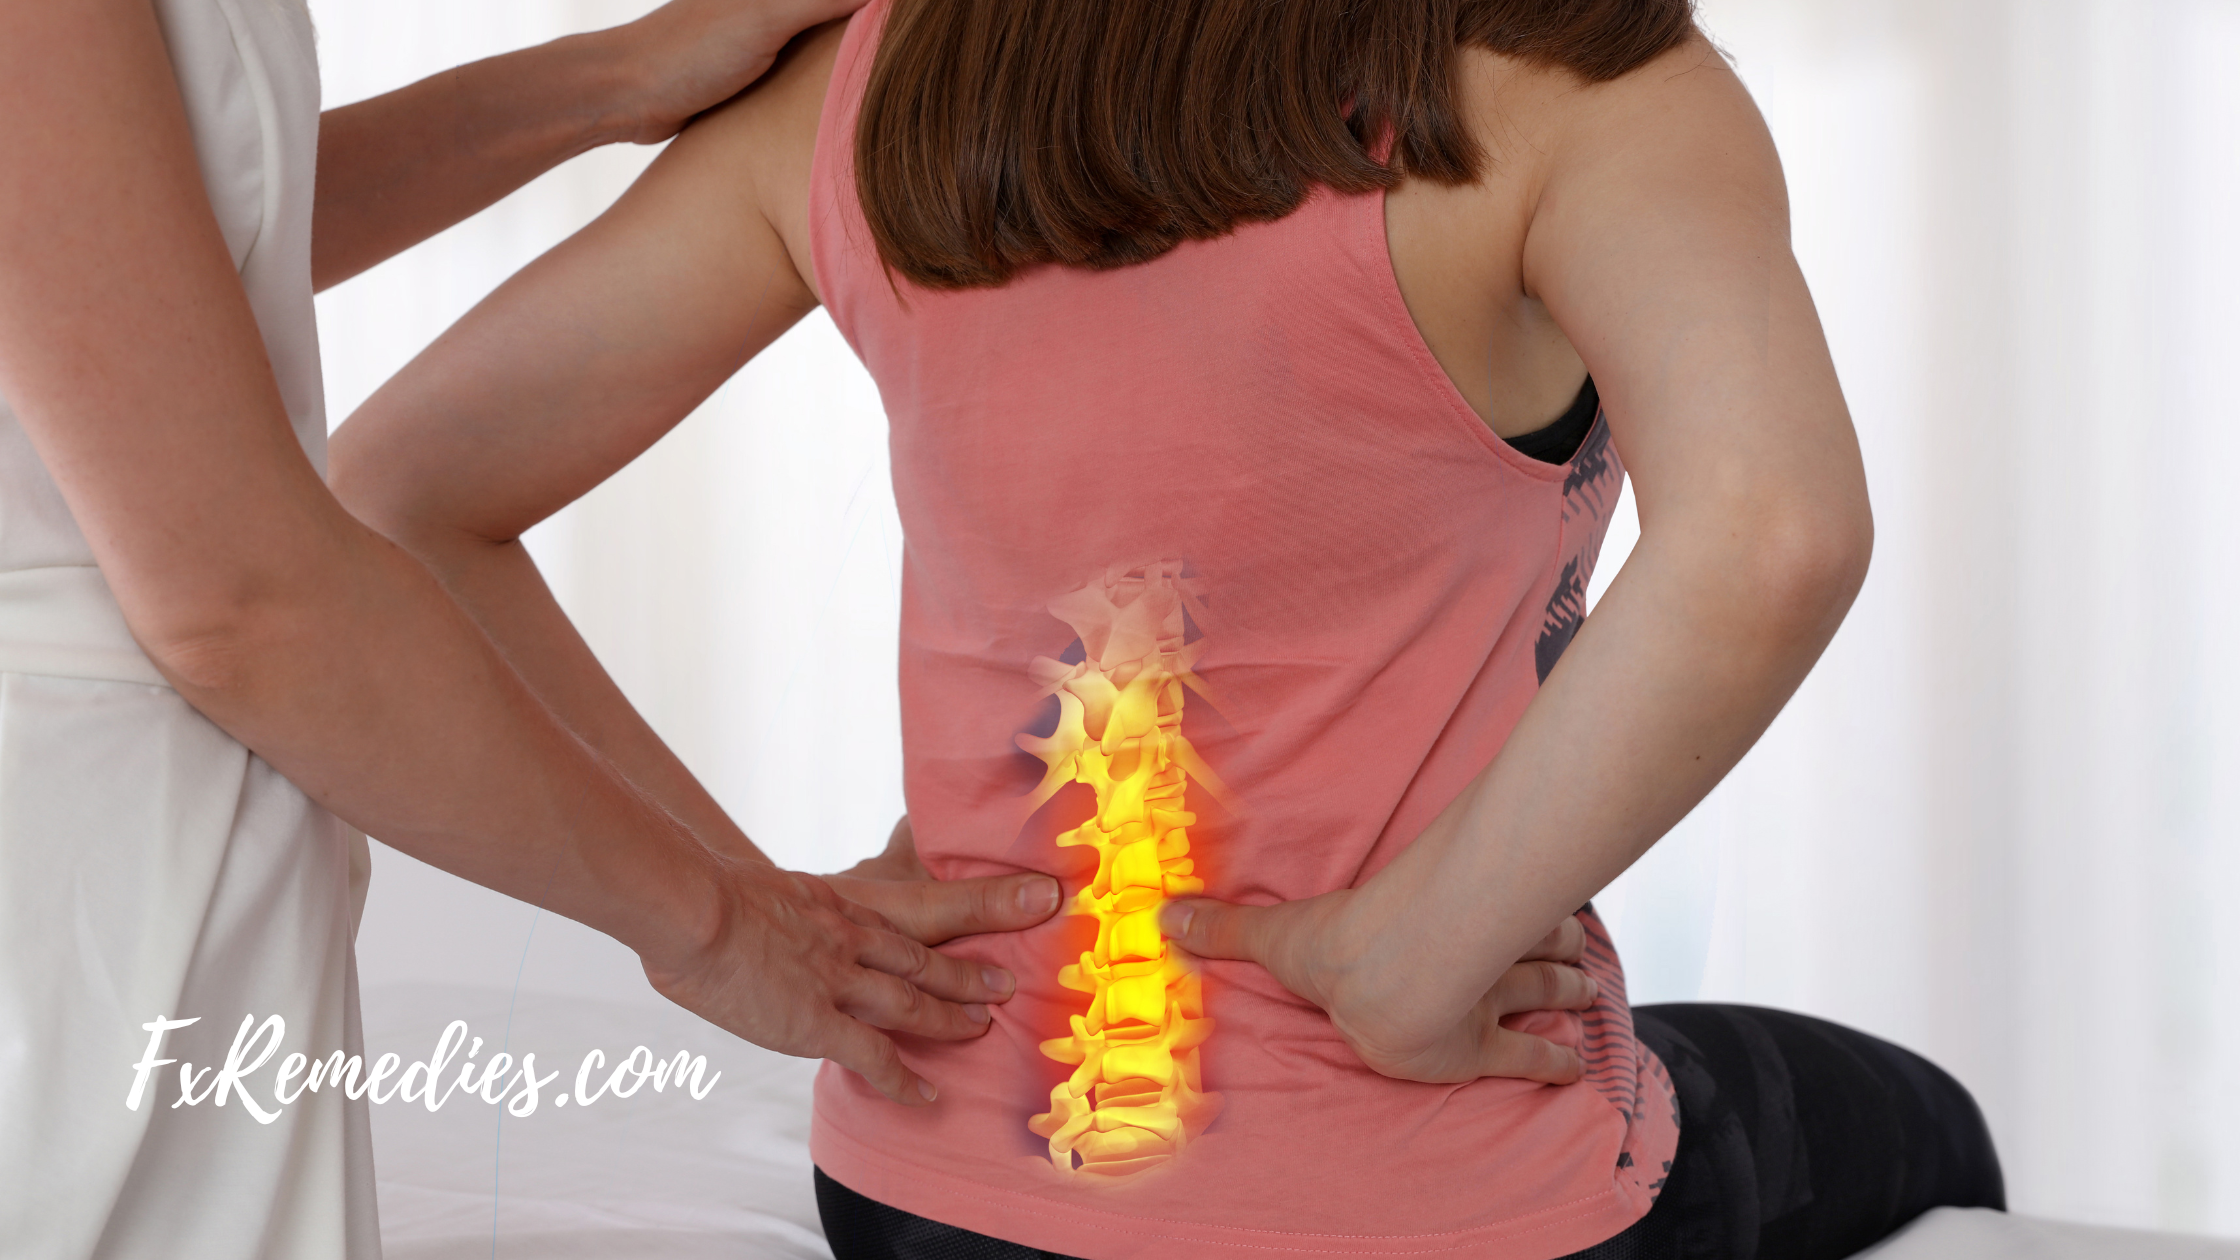 In this article we will be discussing potential remedies for spondylitis. Spondylitis is a chronic inflammatory condition that affects the spine, causing pain, stiffness, and reduced mobility.